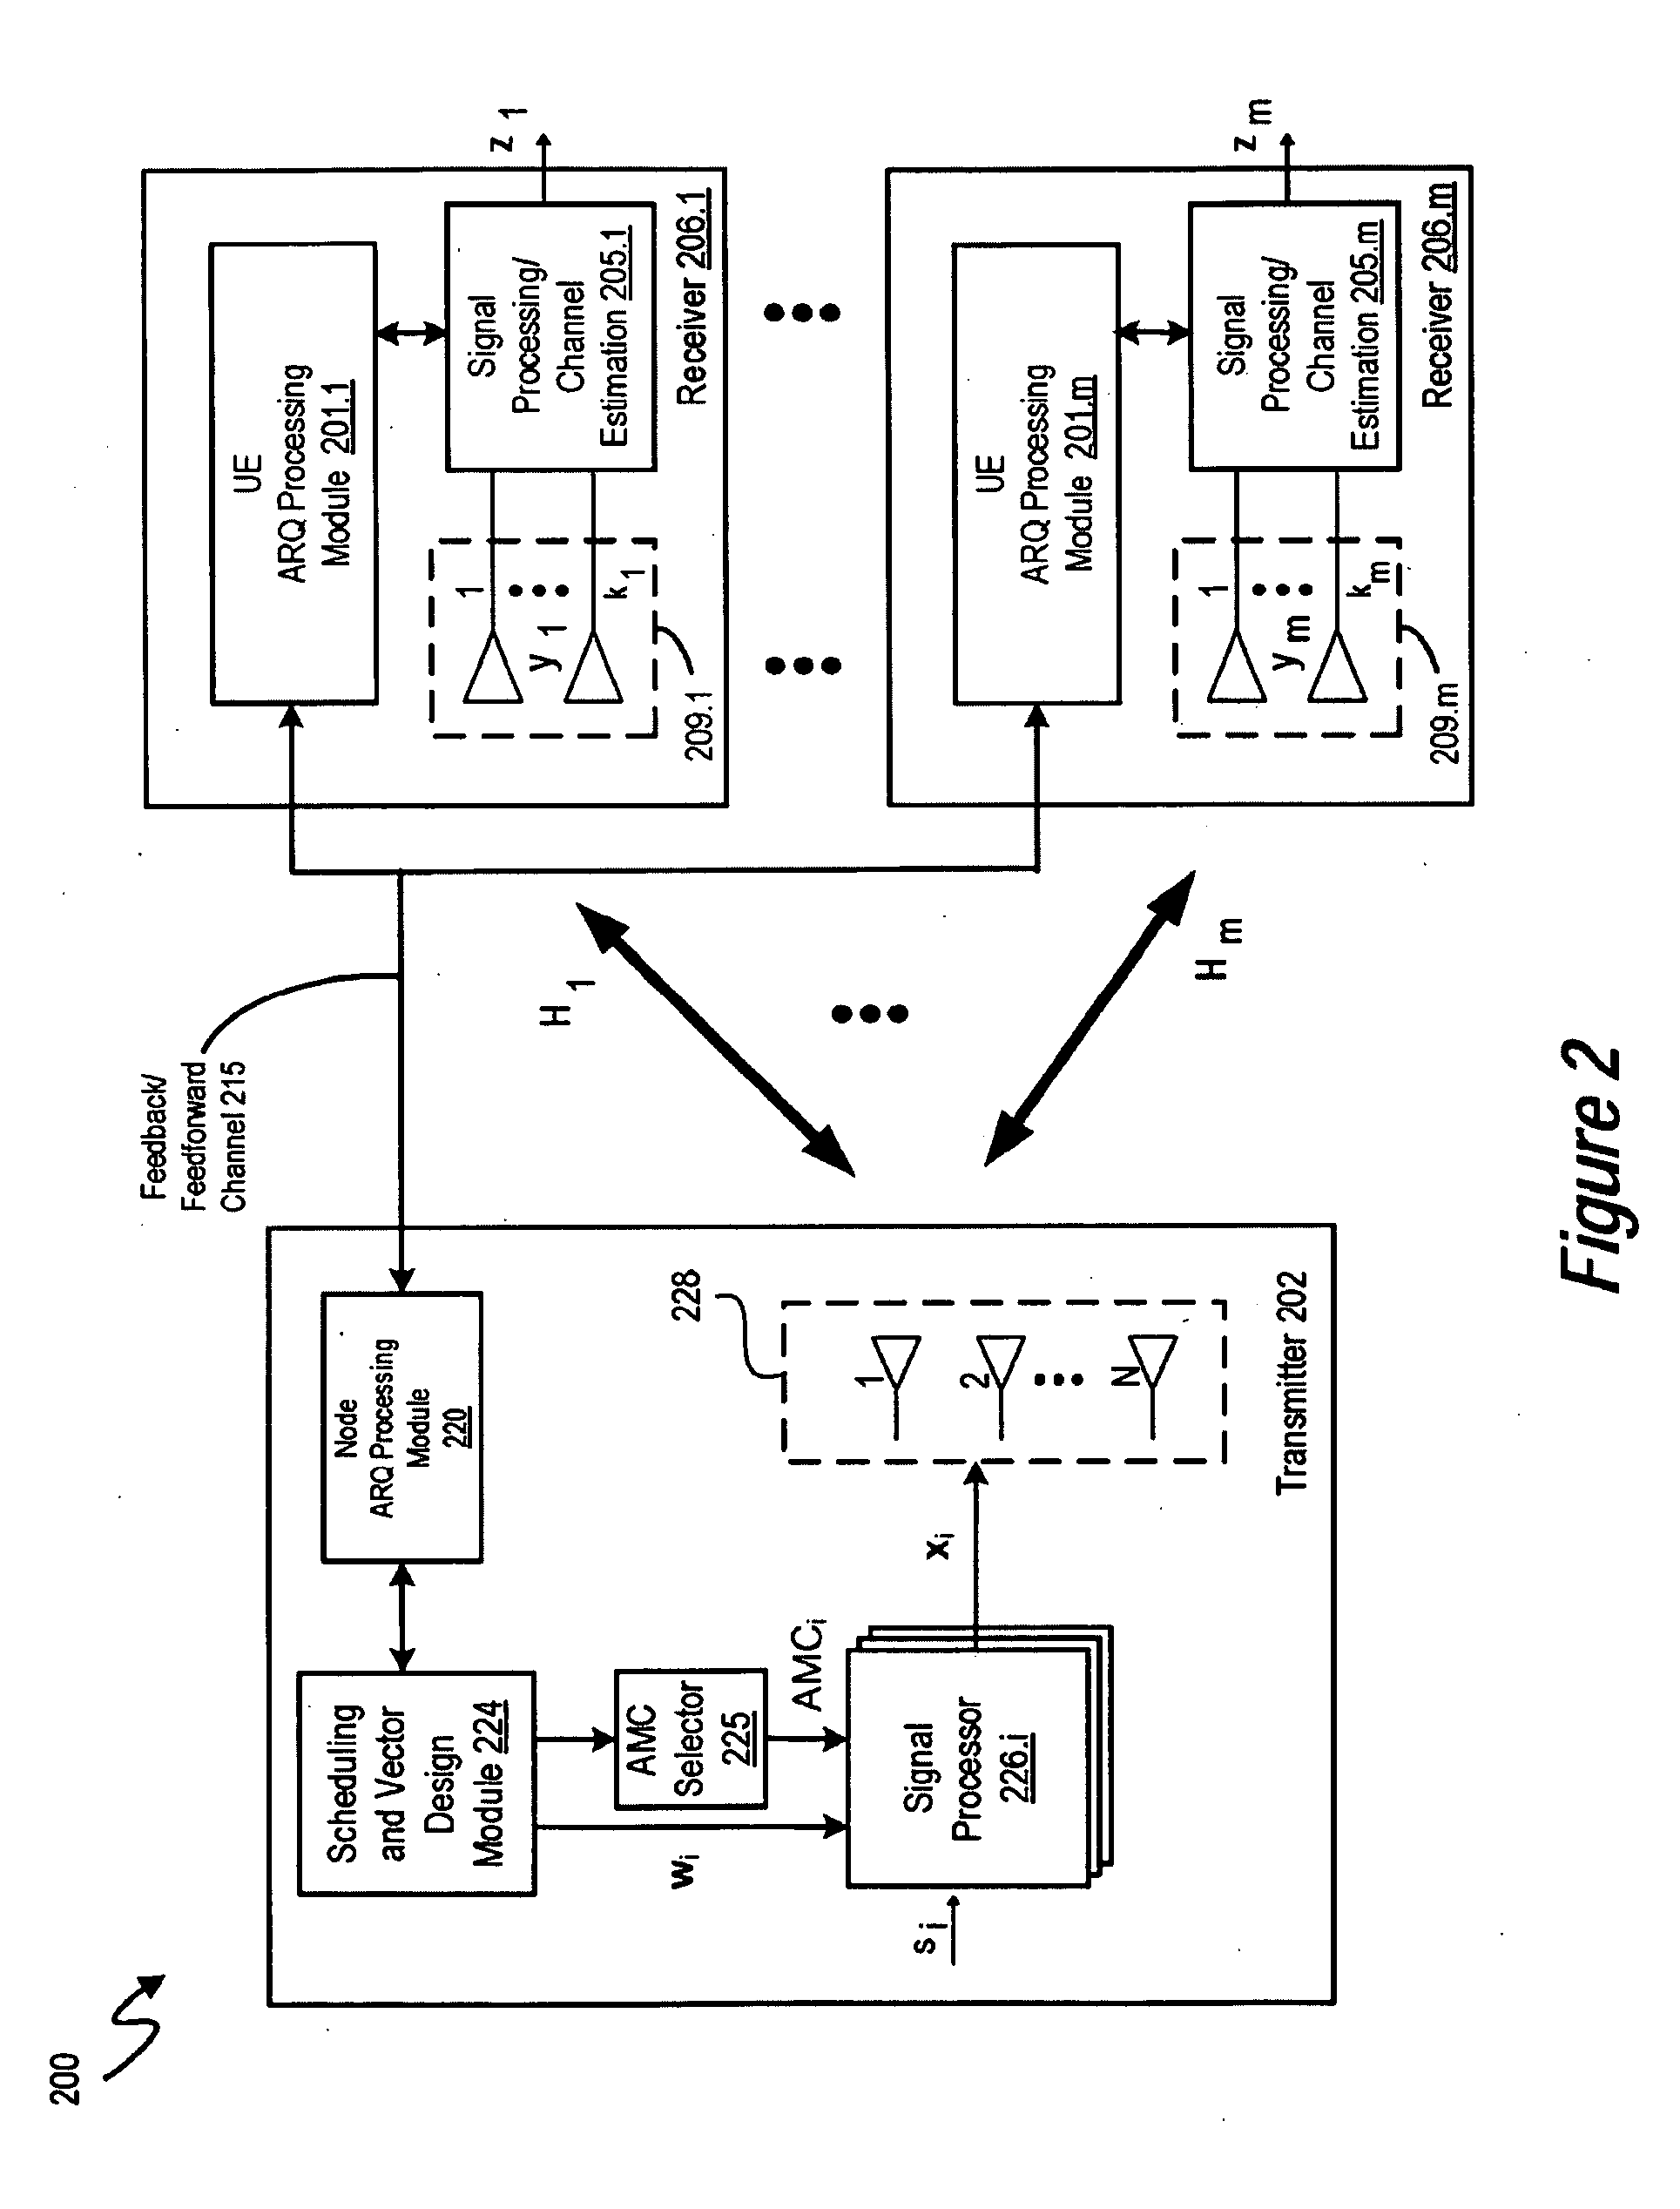 Management of ARQ Detection Threshold in Communication Networks